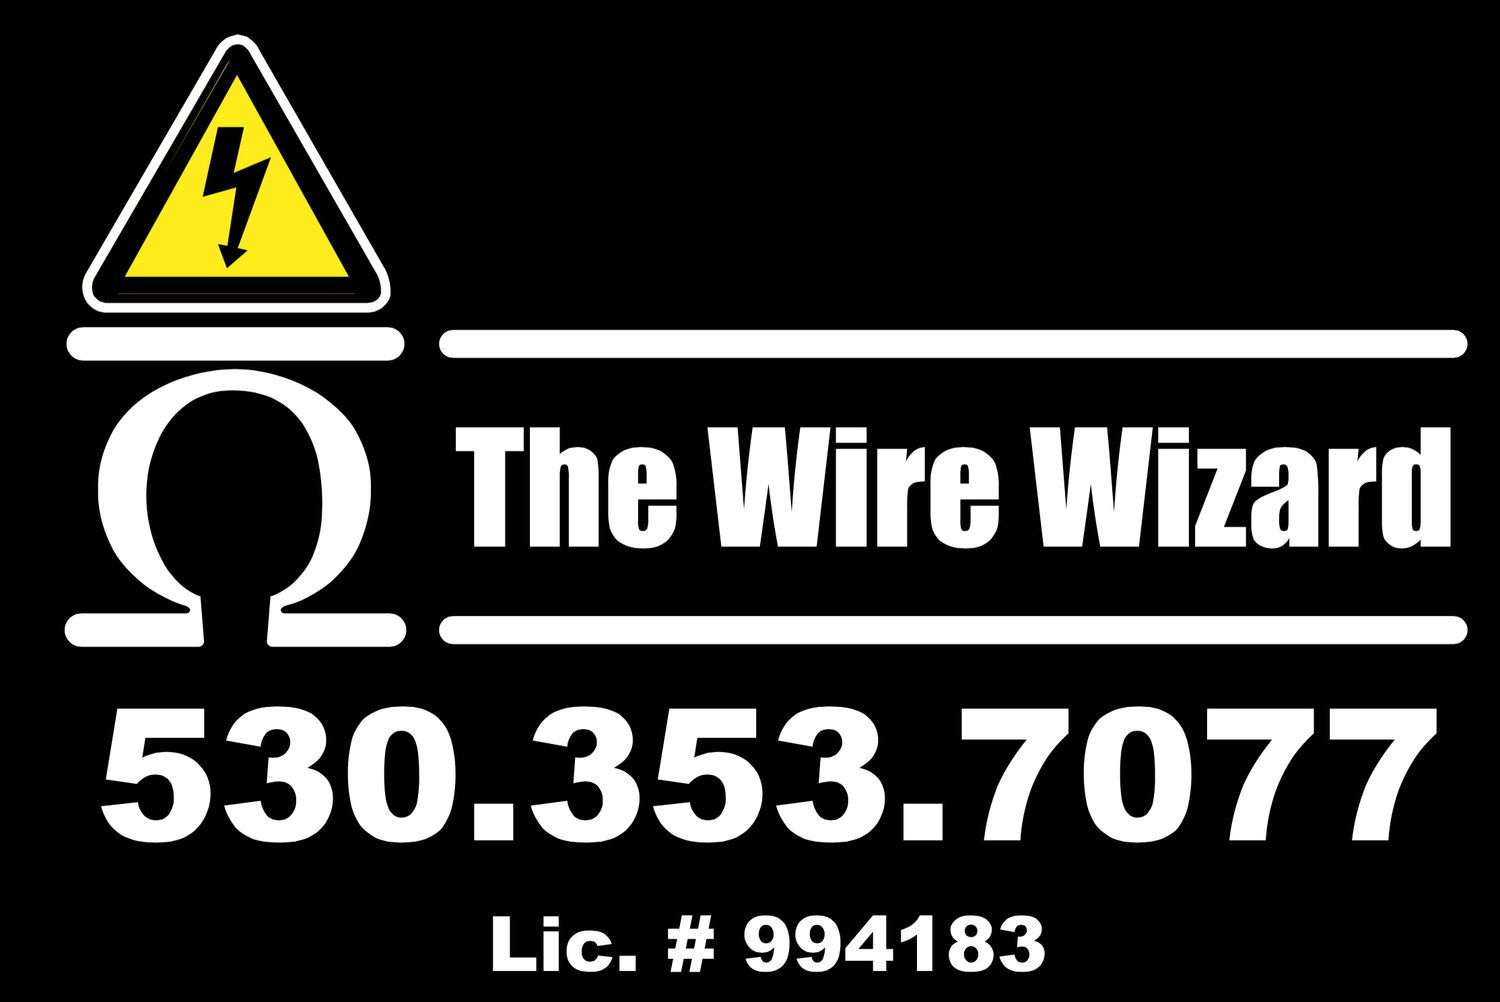 The Wire Wizard